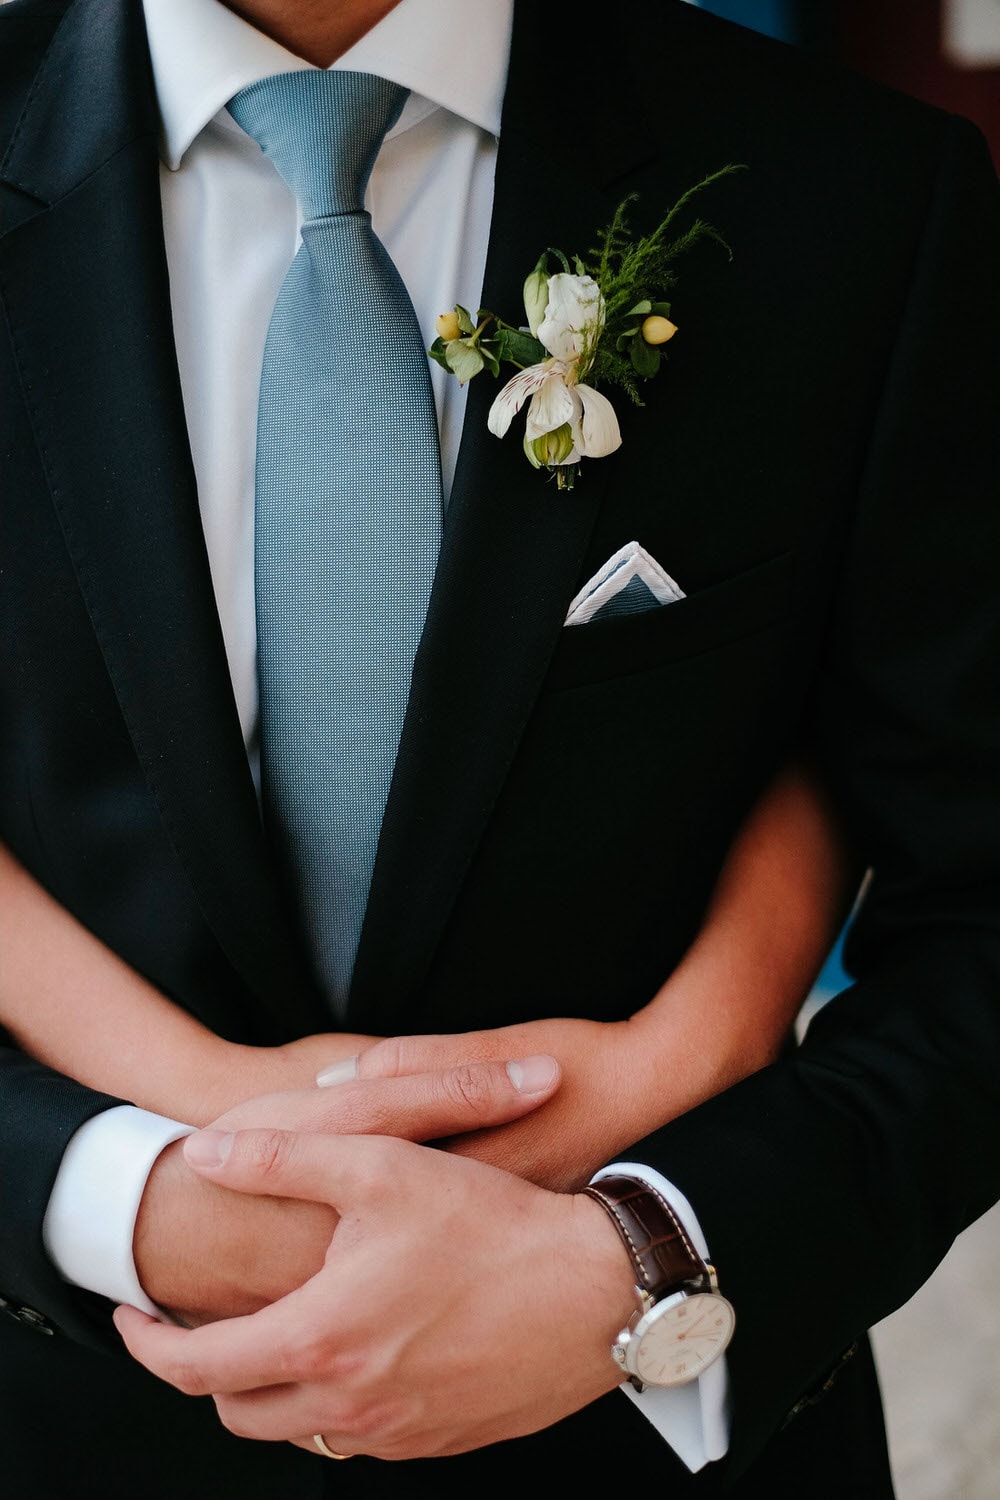 Close-up of the groom's lapel flower, along with his pocket square, tie, and the bride's intertwined hands with the groom's